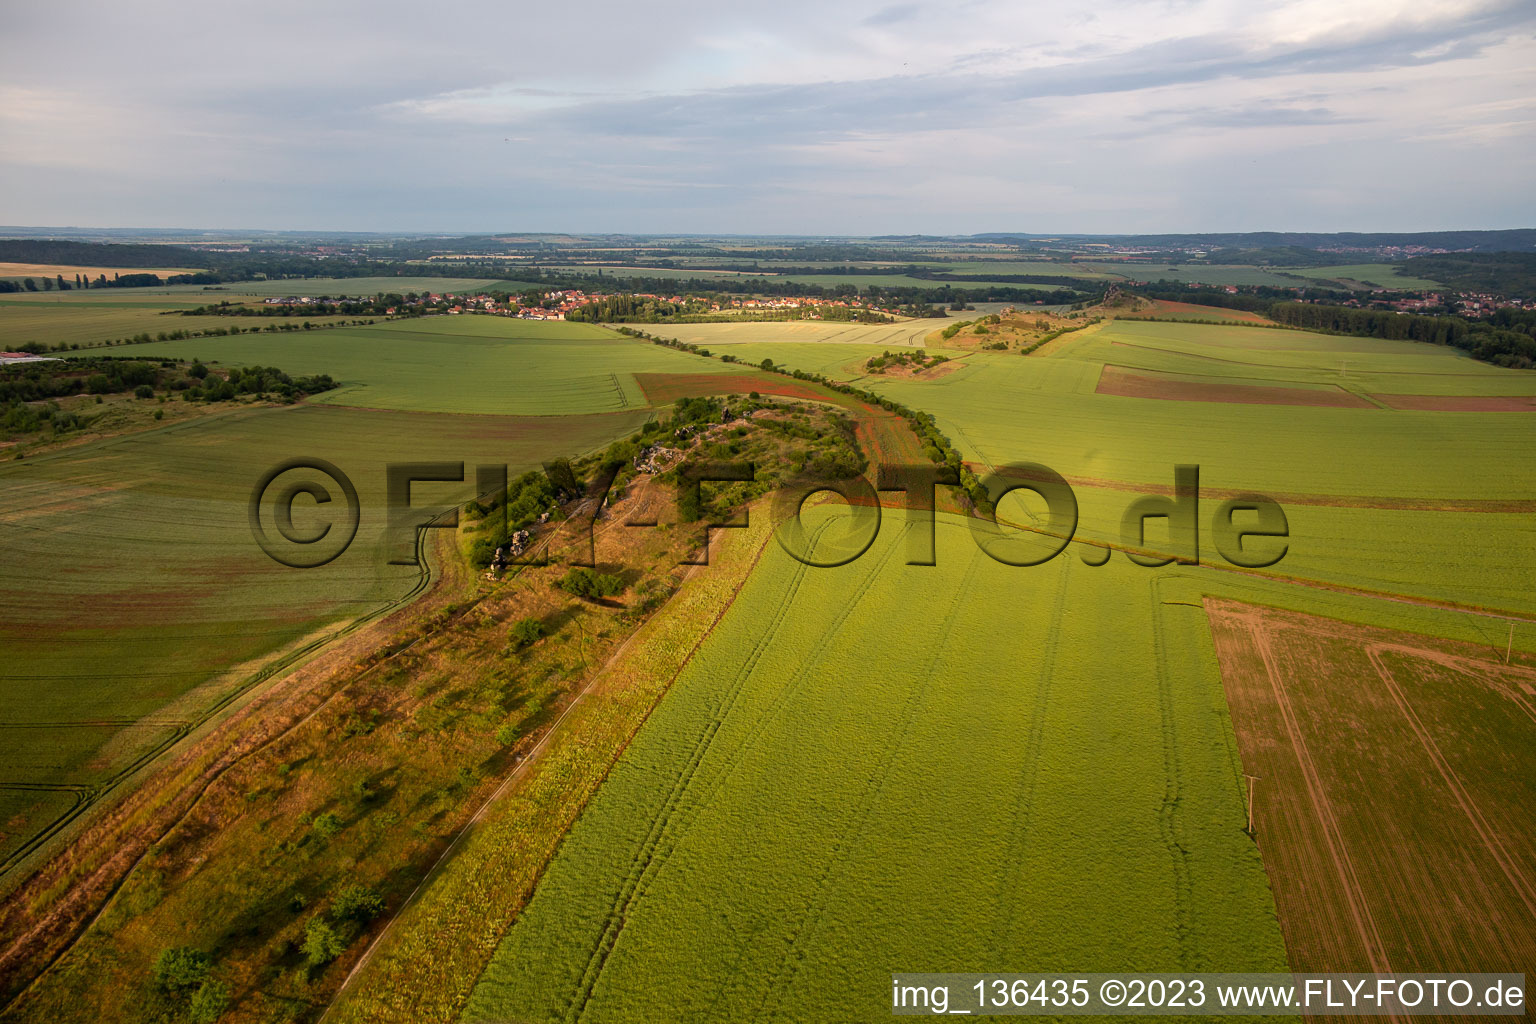 Warnstedt Devil's Wall in Thale in the state Saxony-Anhalt, Germany from above